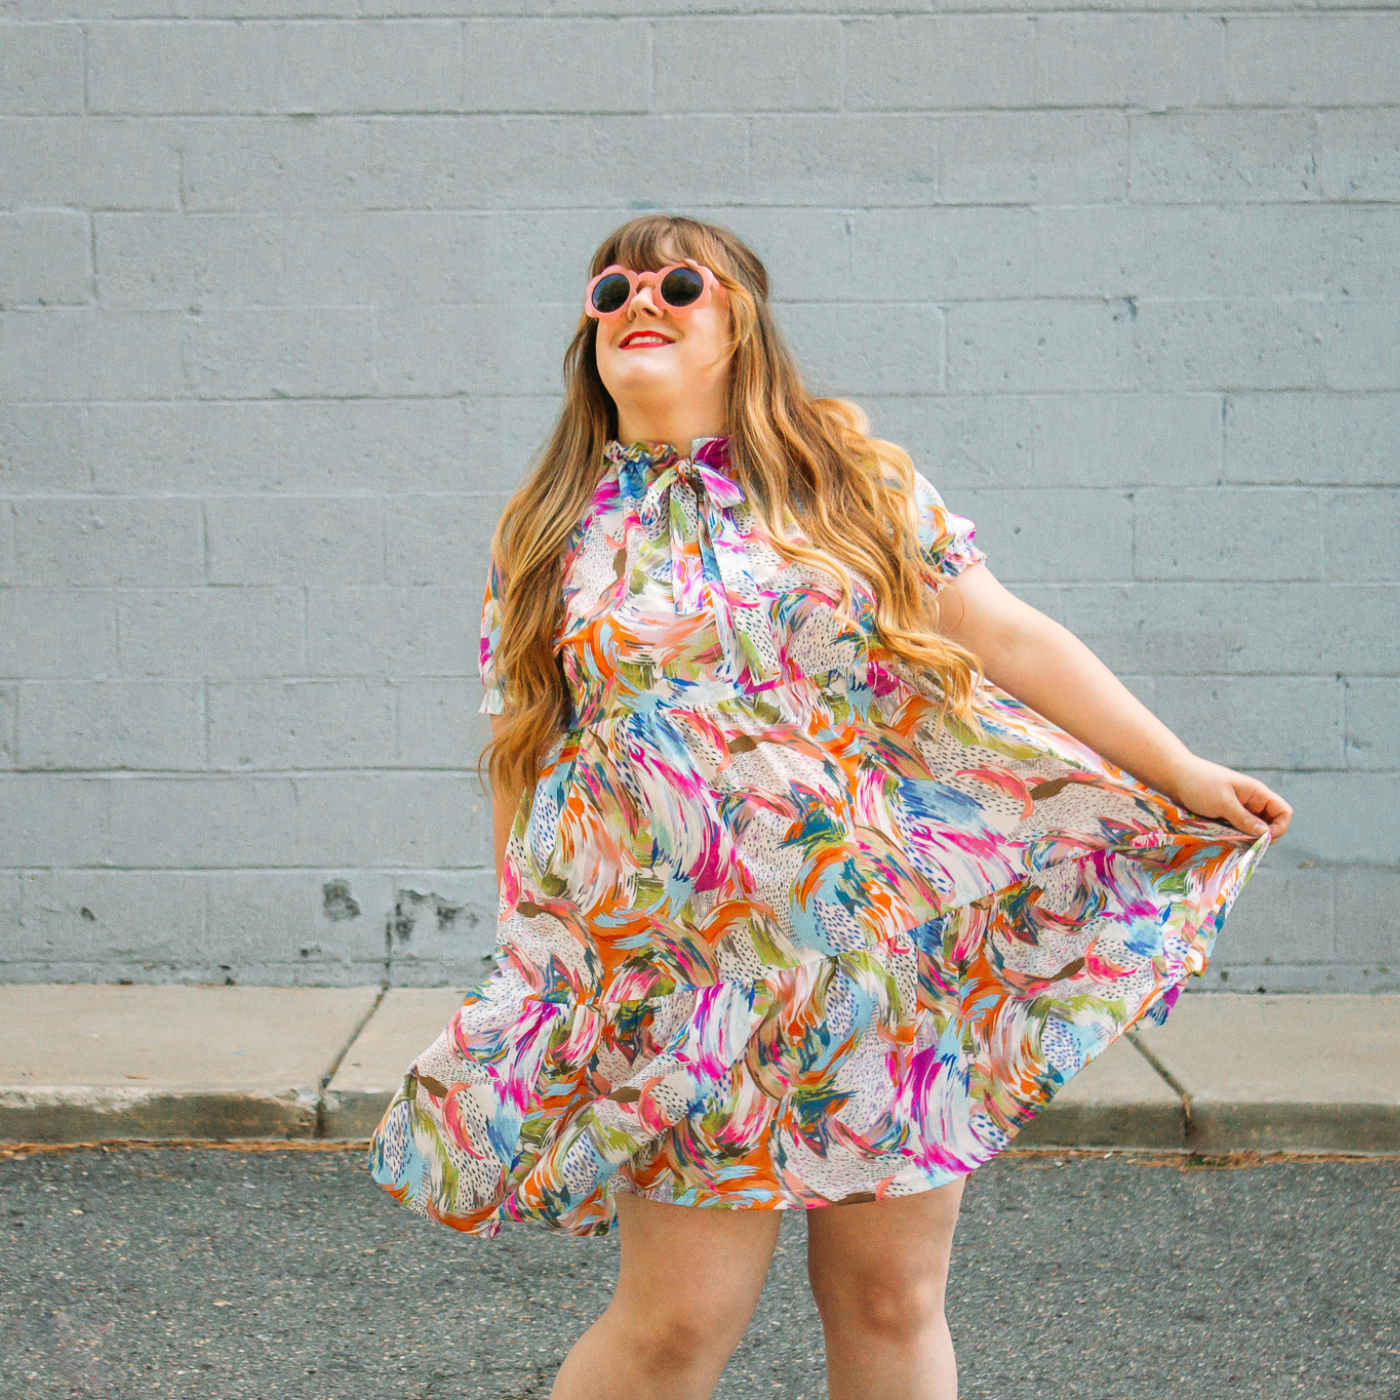 Meg Fleshman is looking up towards the sky and smiling. She is wearing round pink sunglasses and a flowing white knee-length short-sleeved dress with a design with rainbow brushstrokes grouped together in arcs around groups of smaller black brushstrokes. Her left hand is holding out the dress to the side. Behind her is a light blue concrete wall.